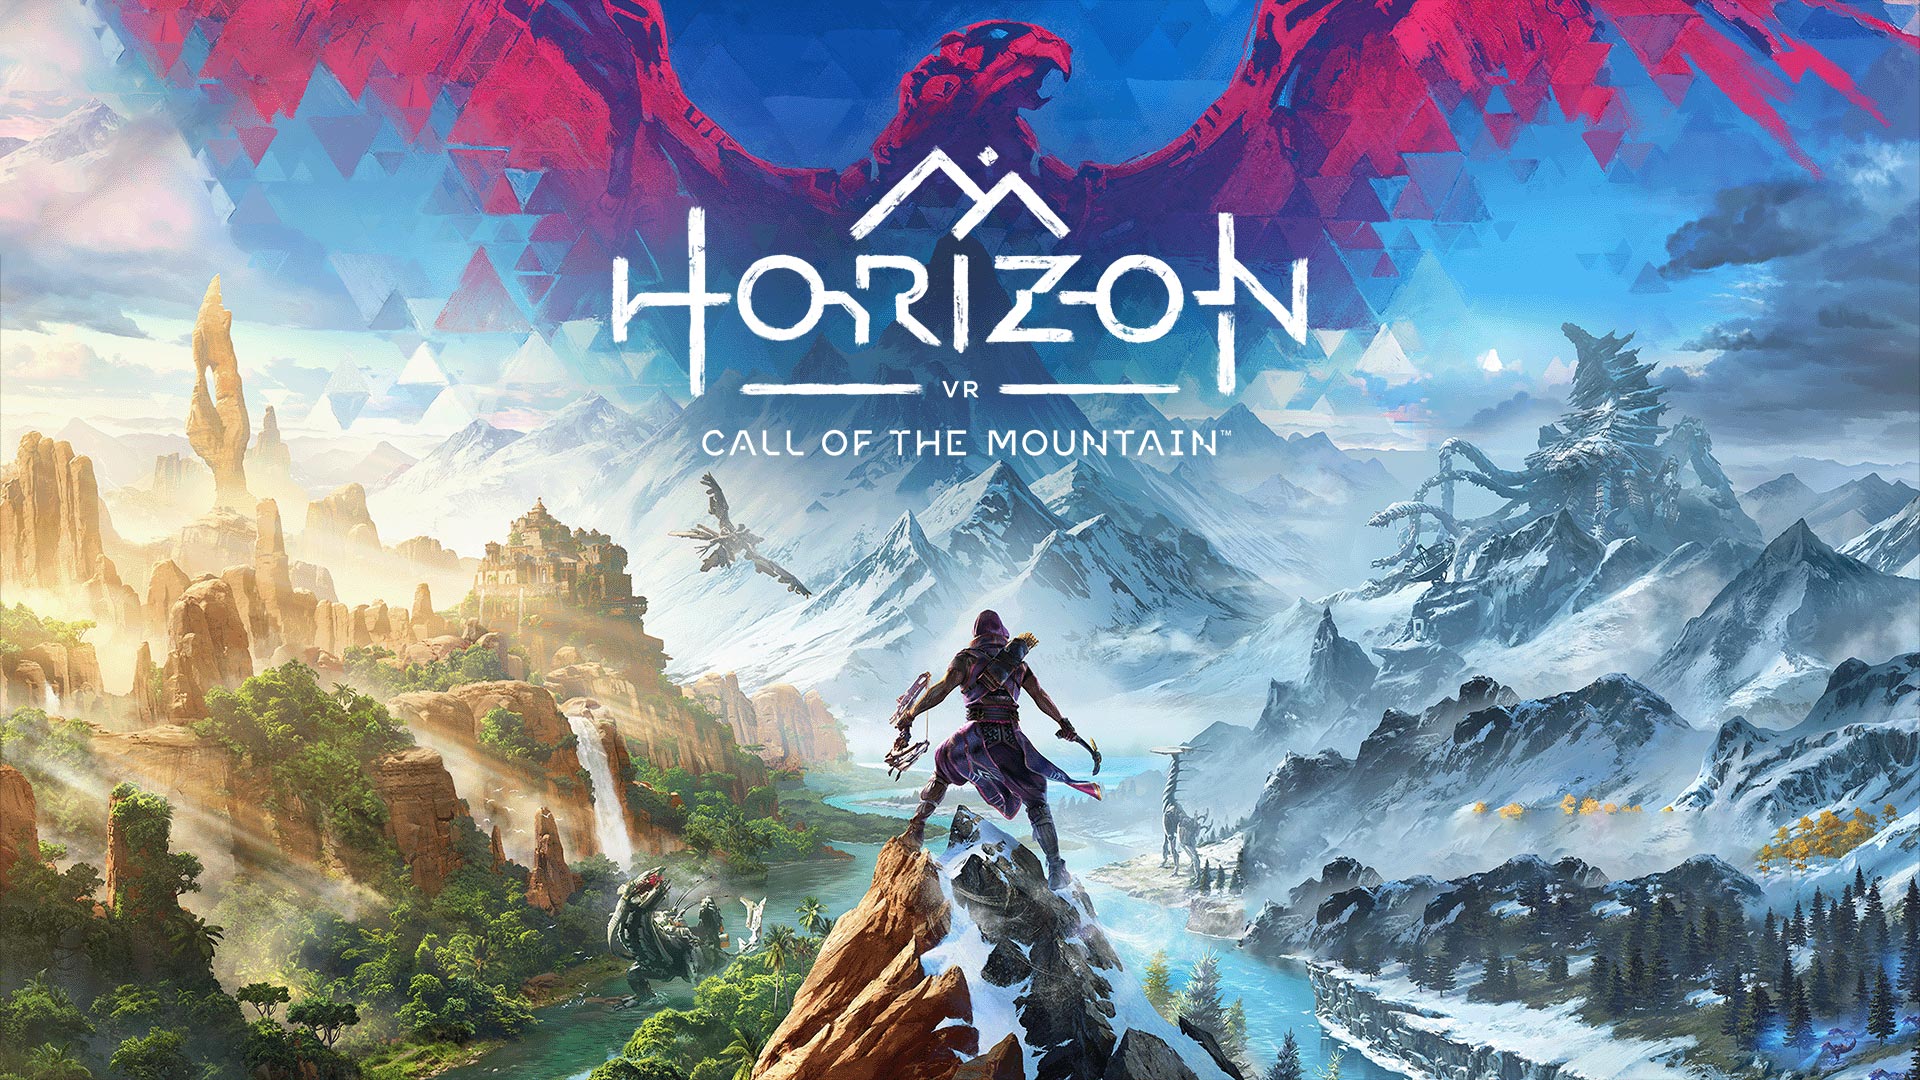 ‘Horizon Call of the Mountain’ Gameplay Trailer Suggests It Will Be More than a Mere Experience